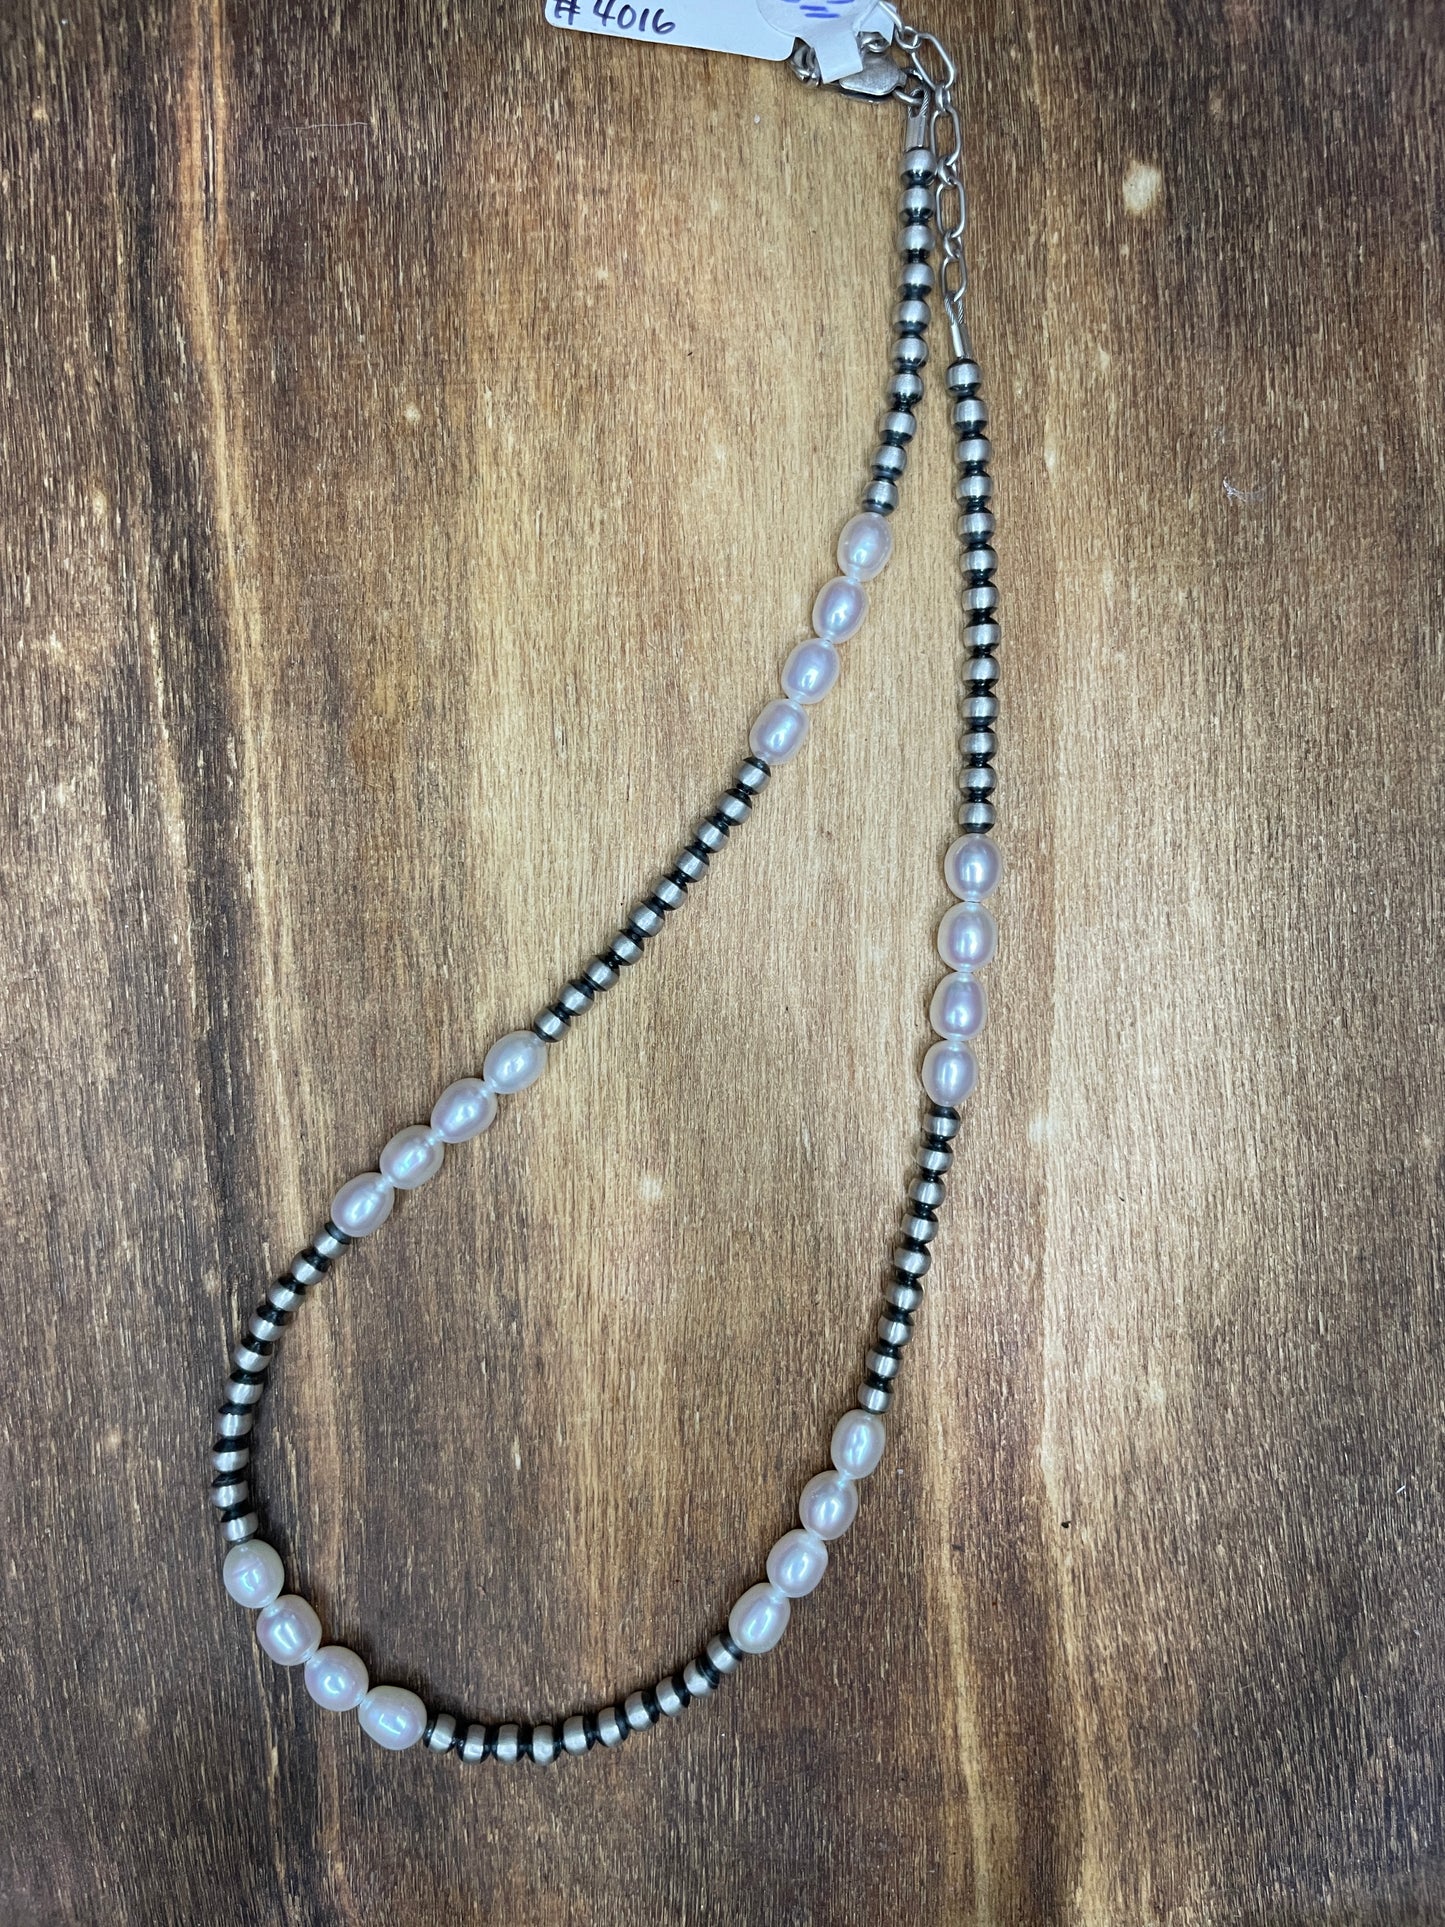 4mm Navajo Pearl Necklace + Fresh Water Pearl 16” w/ extender